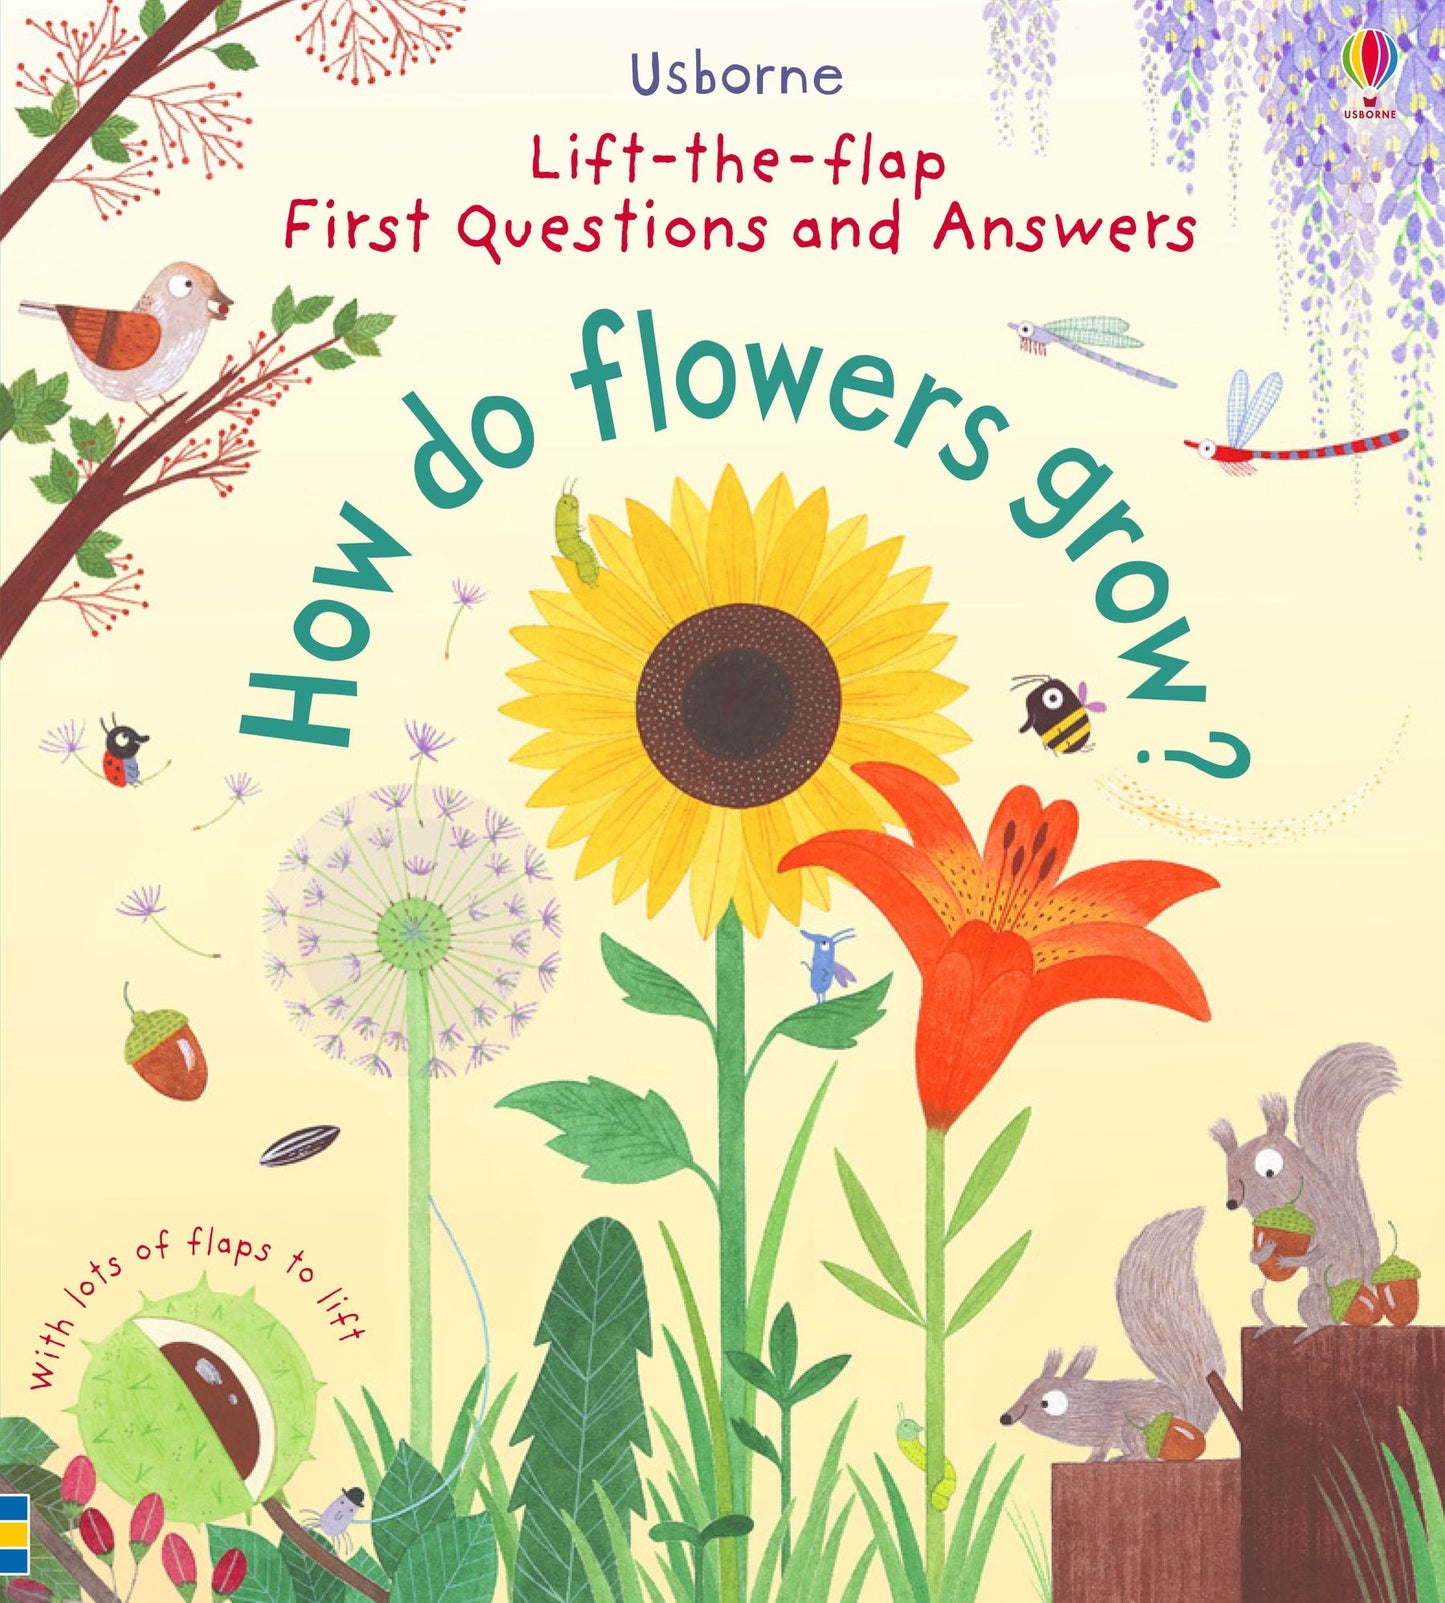 First Questions and Answers: How do flowers grow?